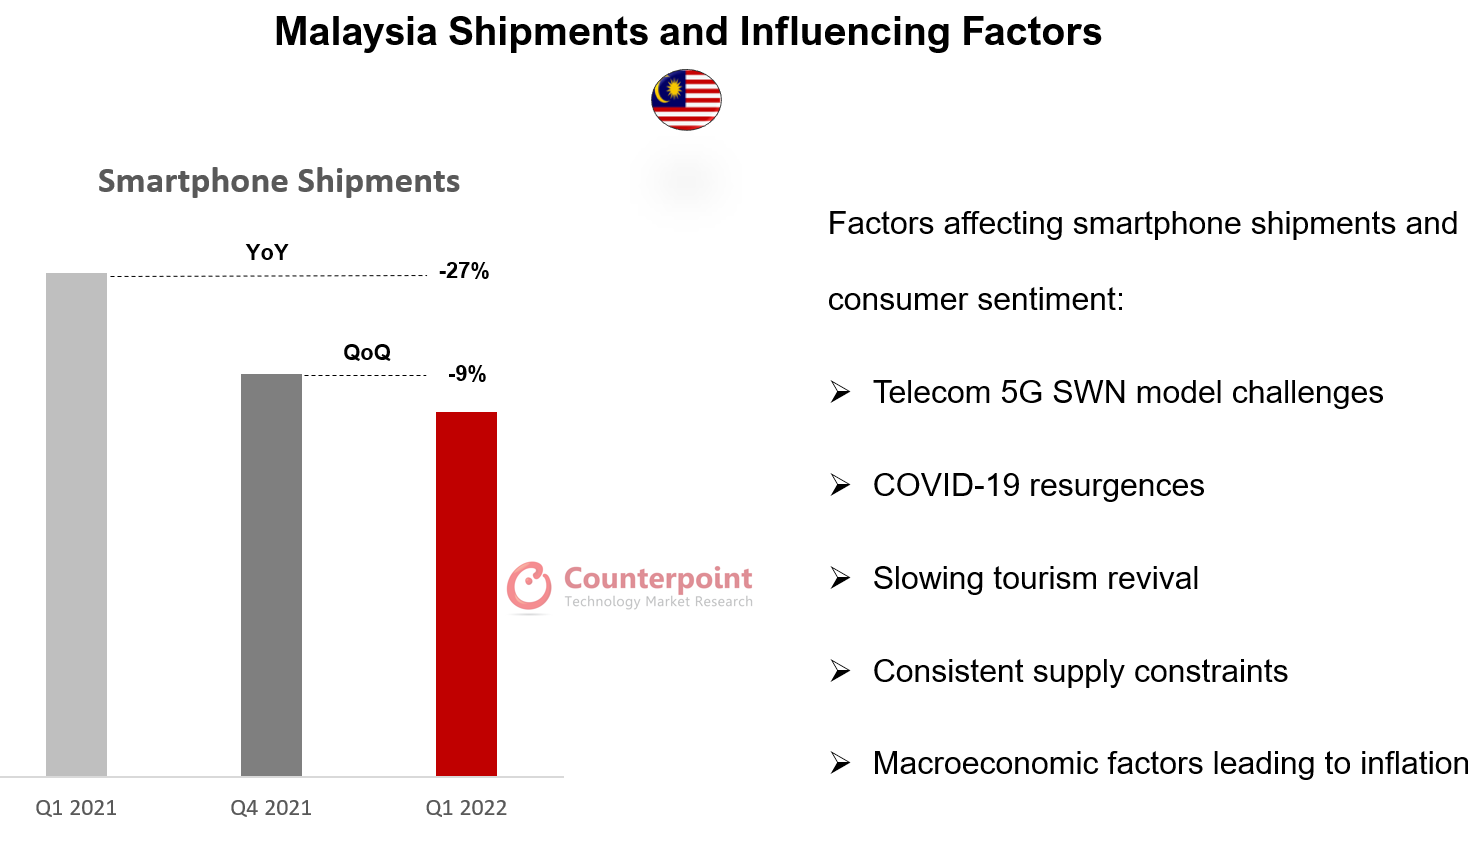 Malaysia Shipments and Influencing Factors